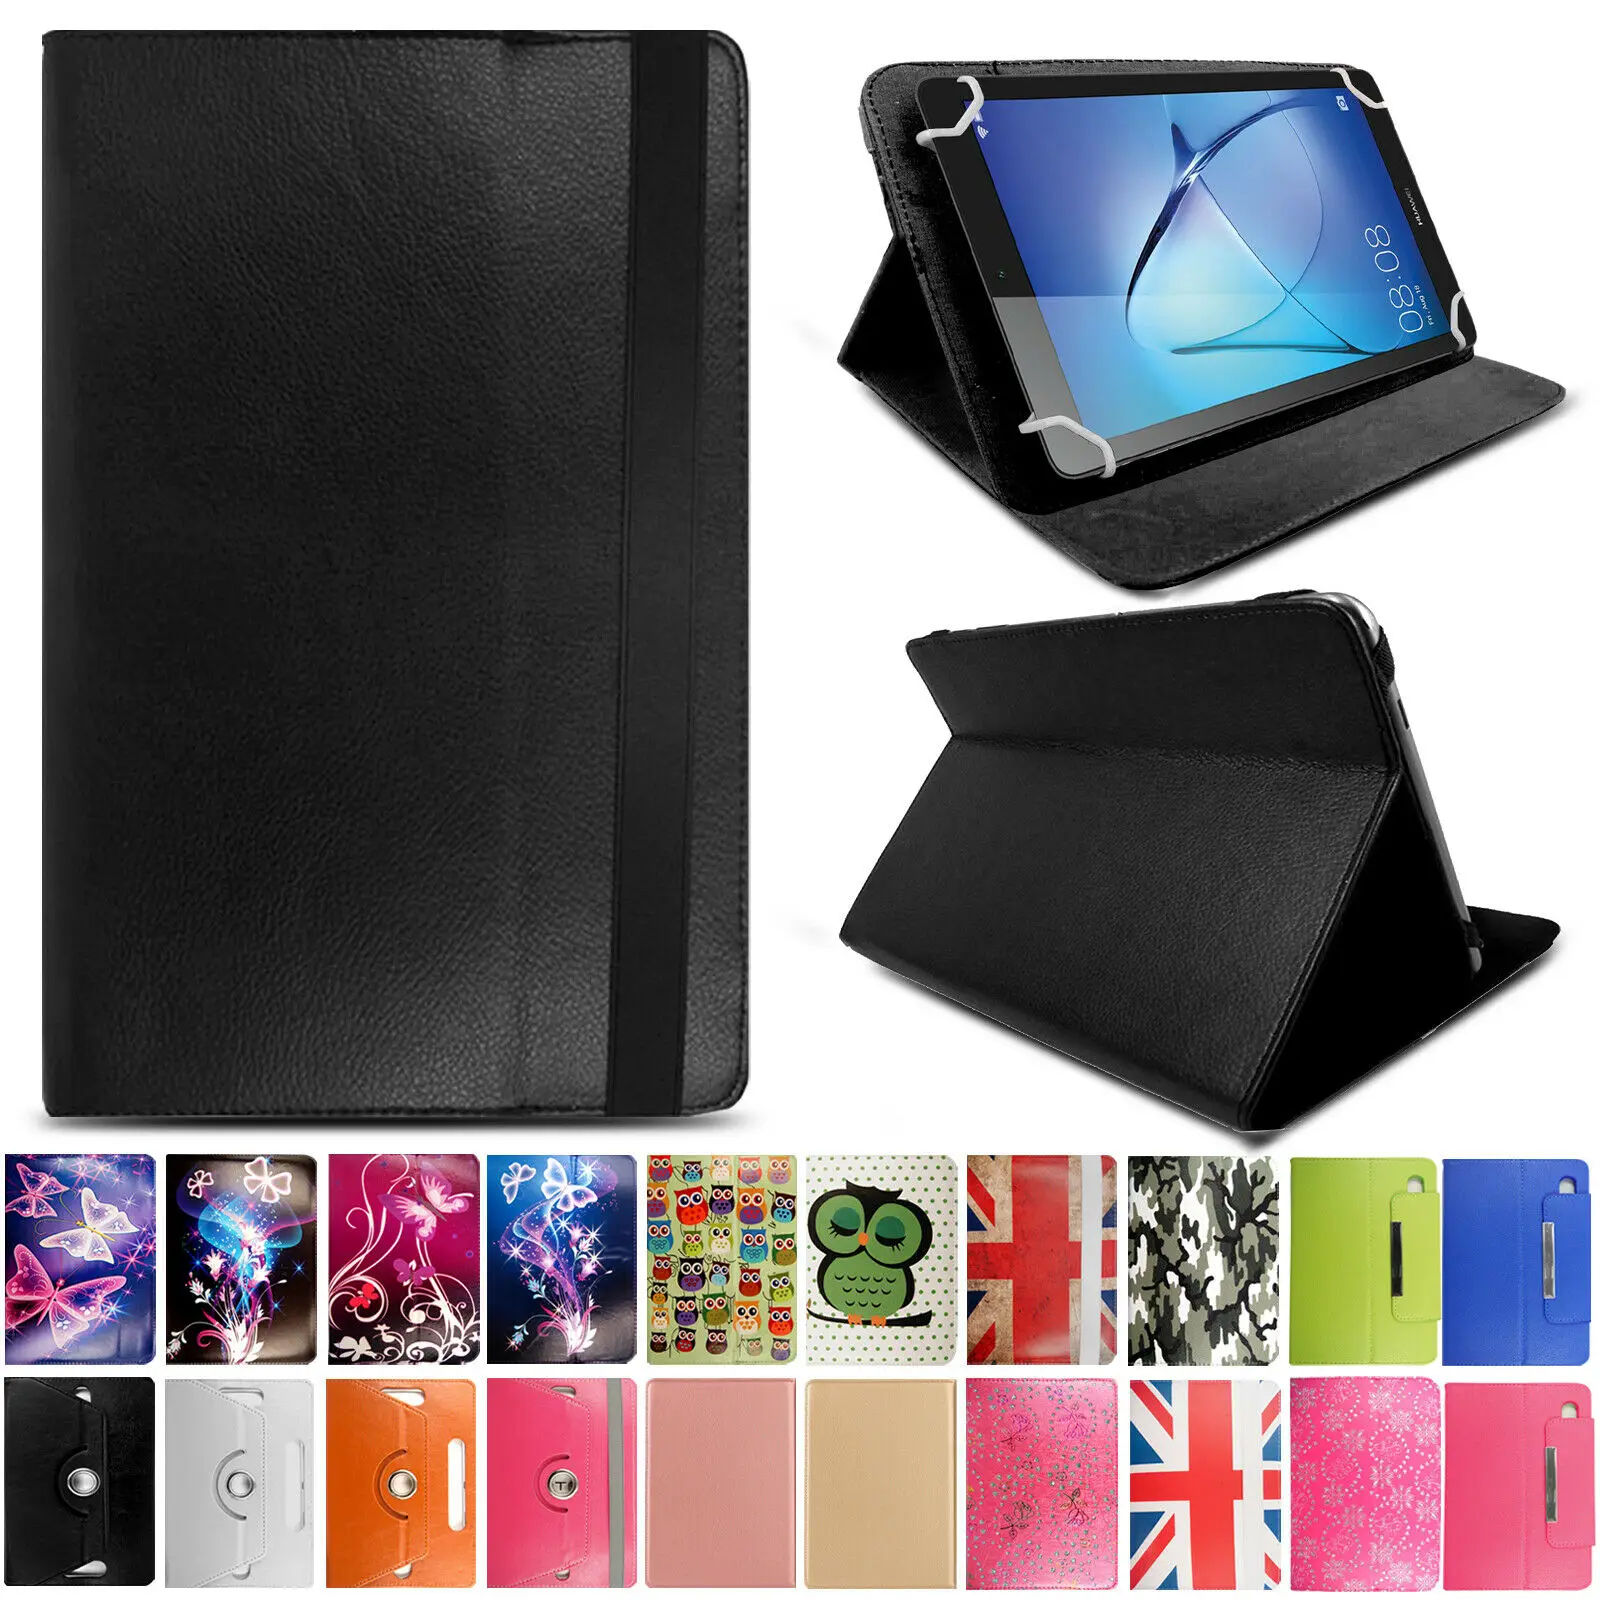 

Case For All 7" 8" 9" 10.1" inch Tab/Tablets Leather Flip Smart Stand Cover